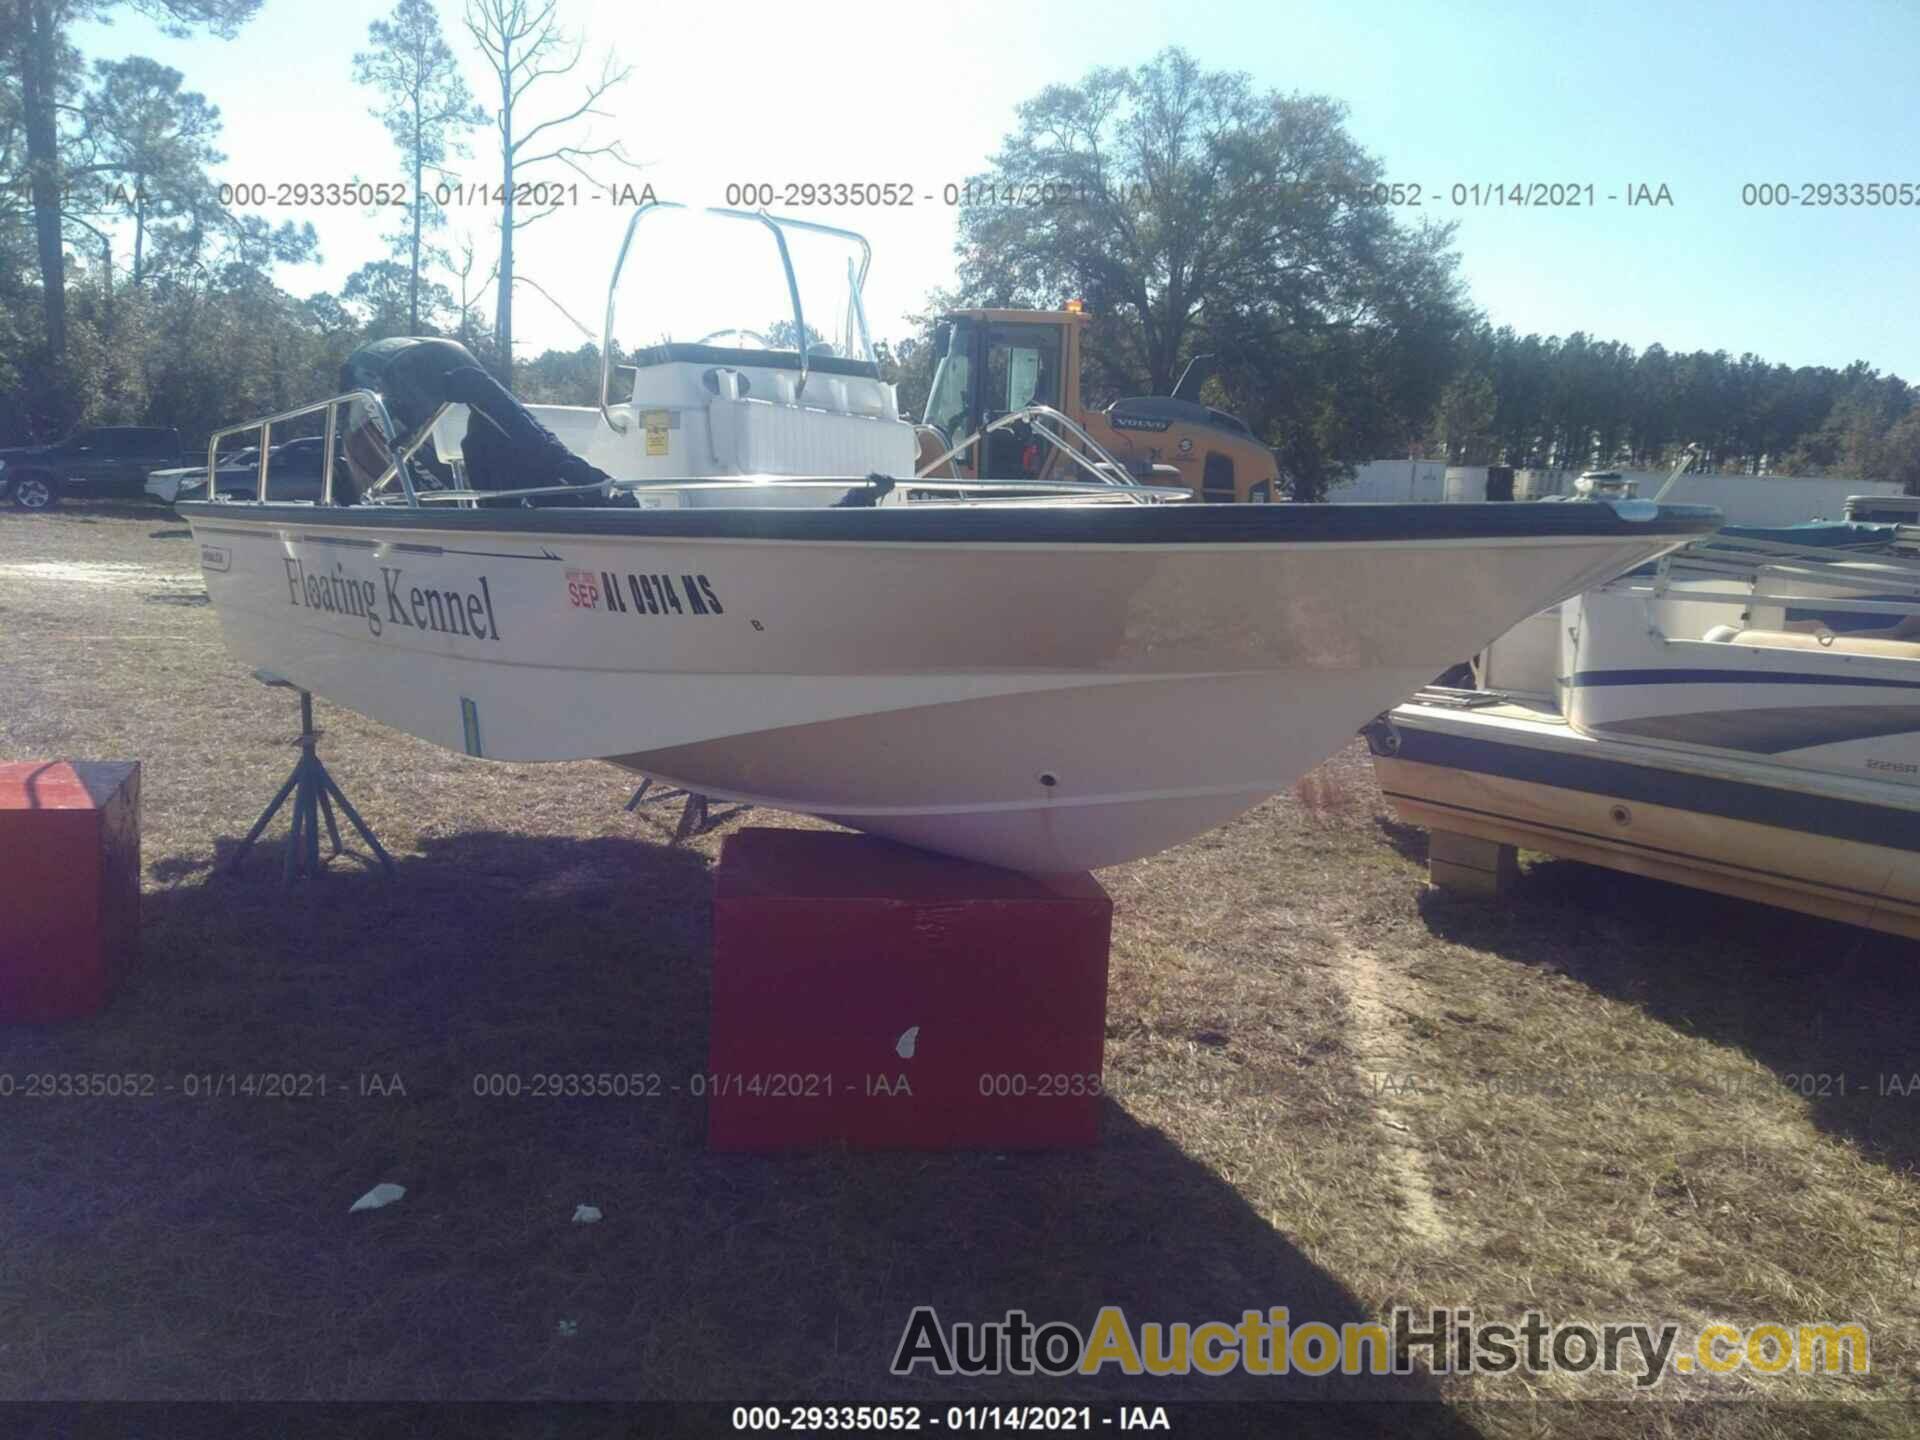 BOSTON WHALER OTHER, BWCE0973A515